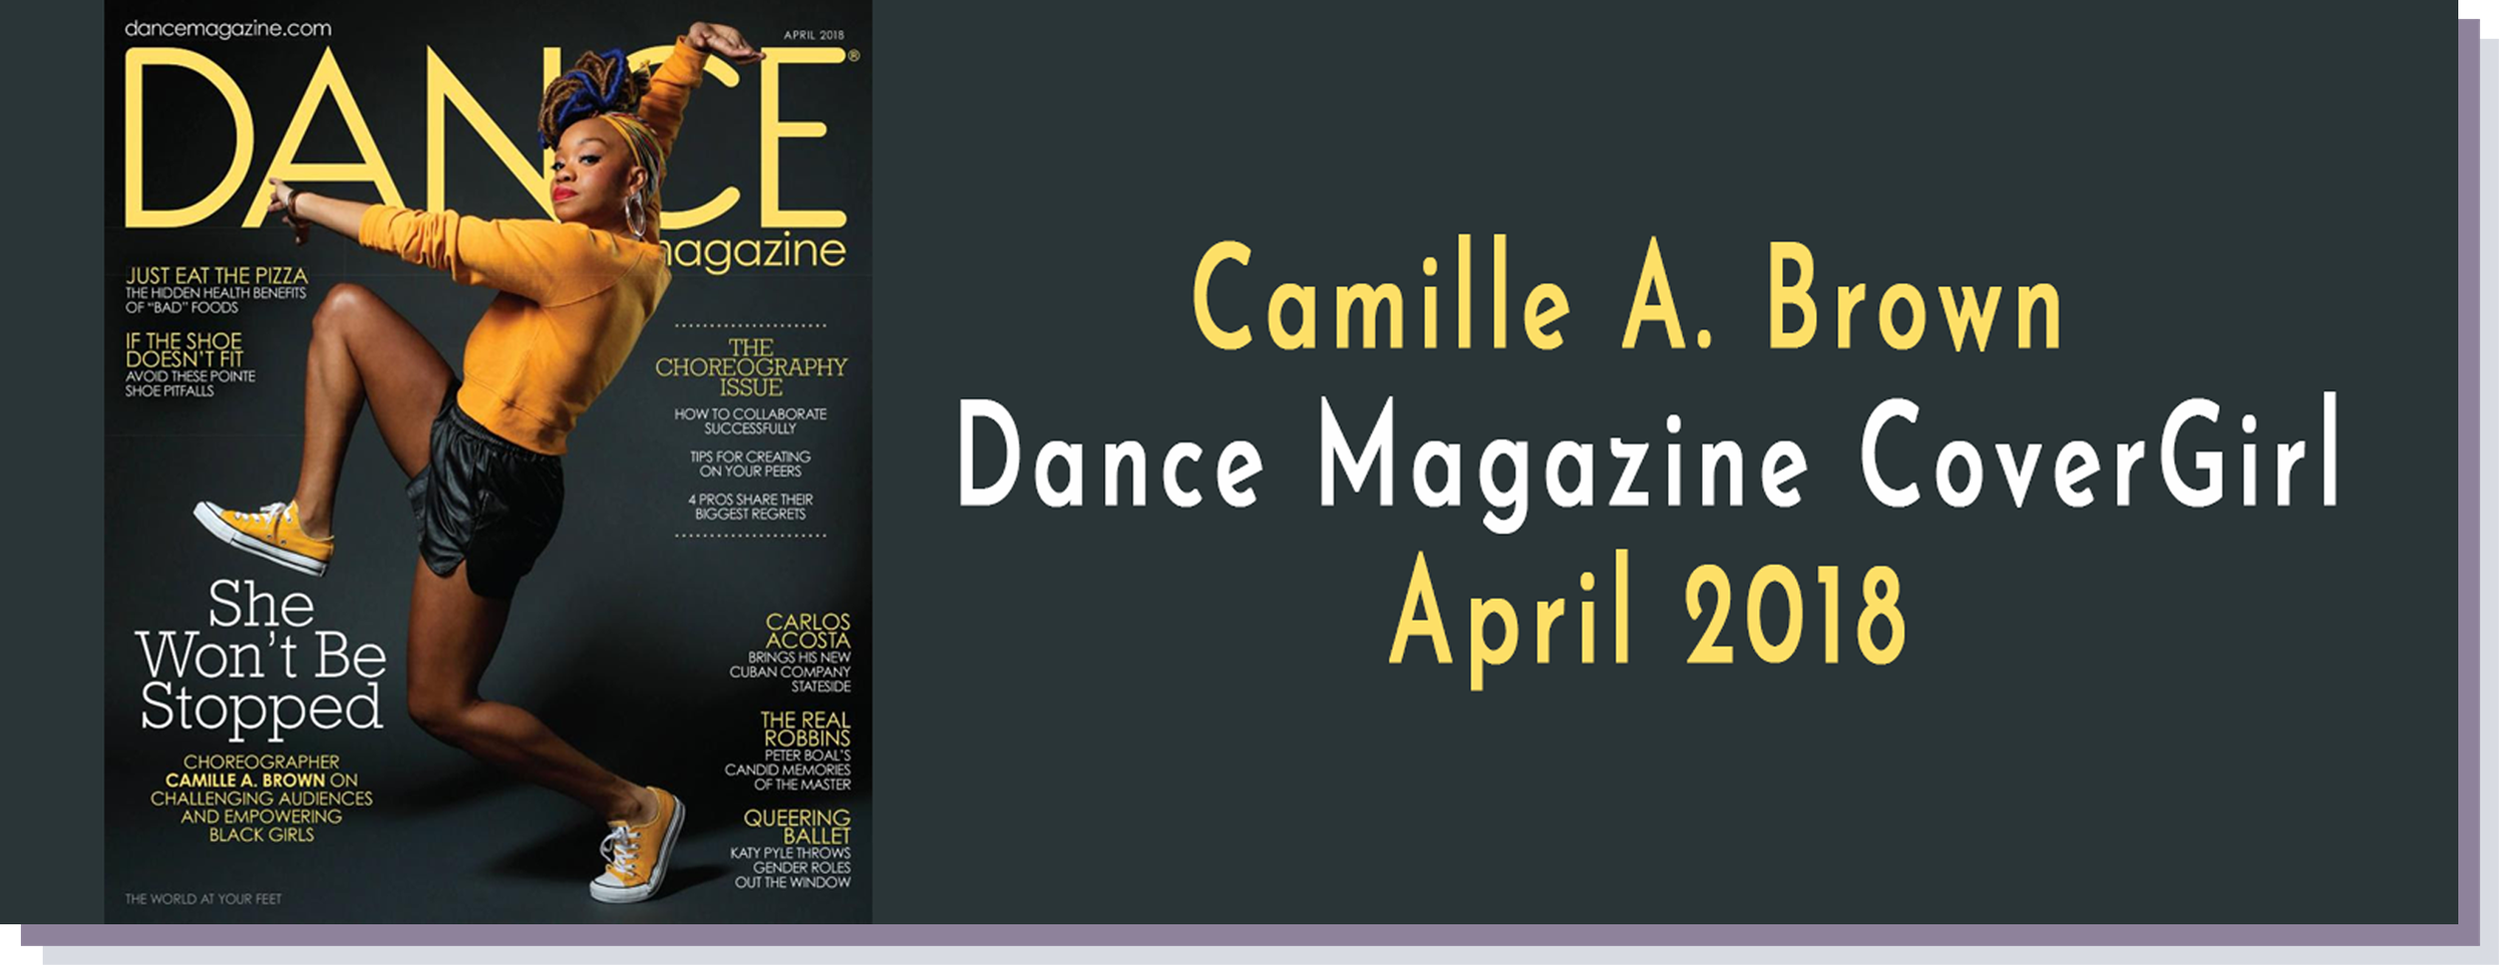 DanceMagBanner.png